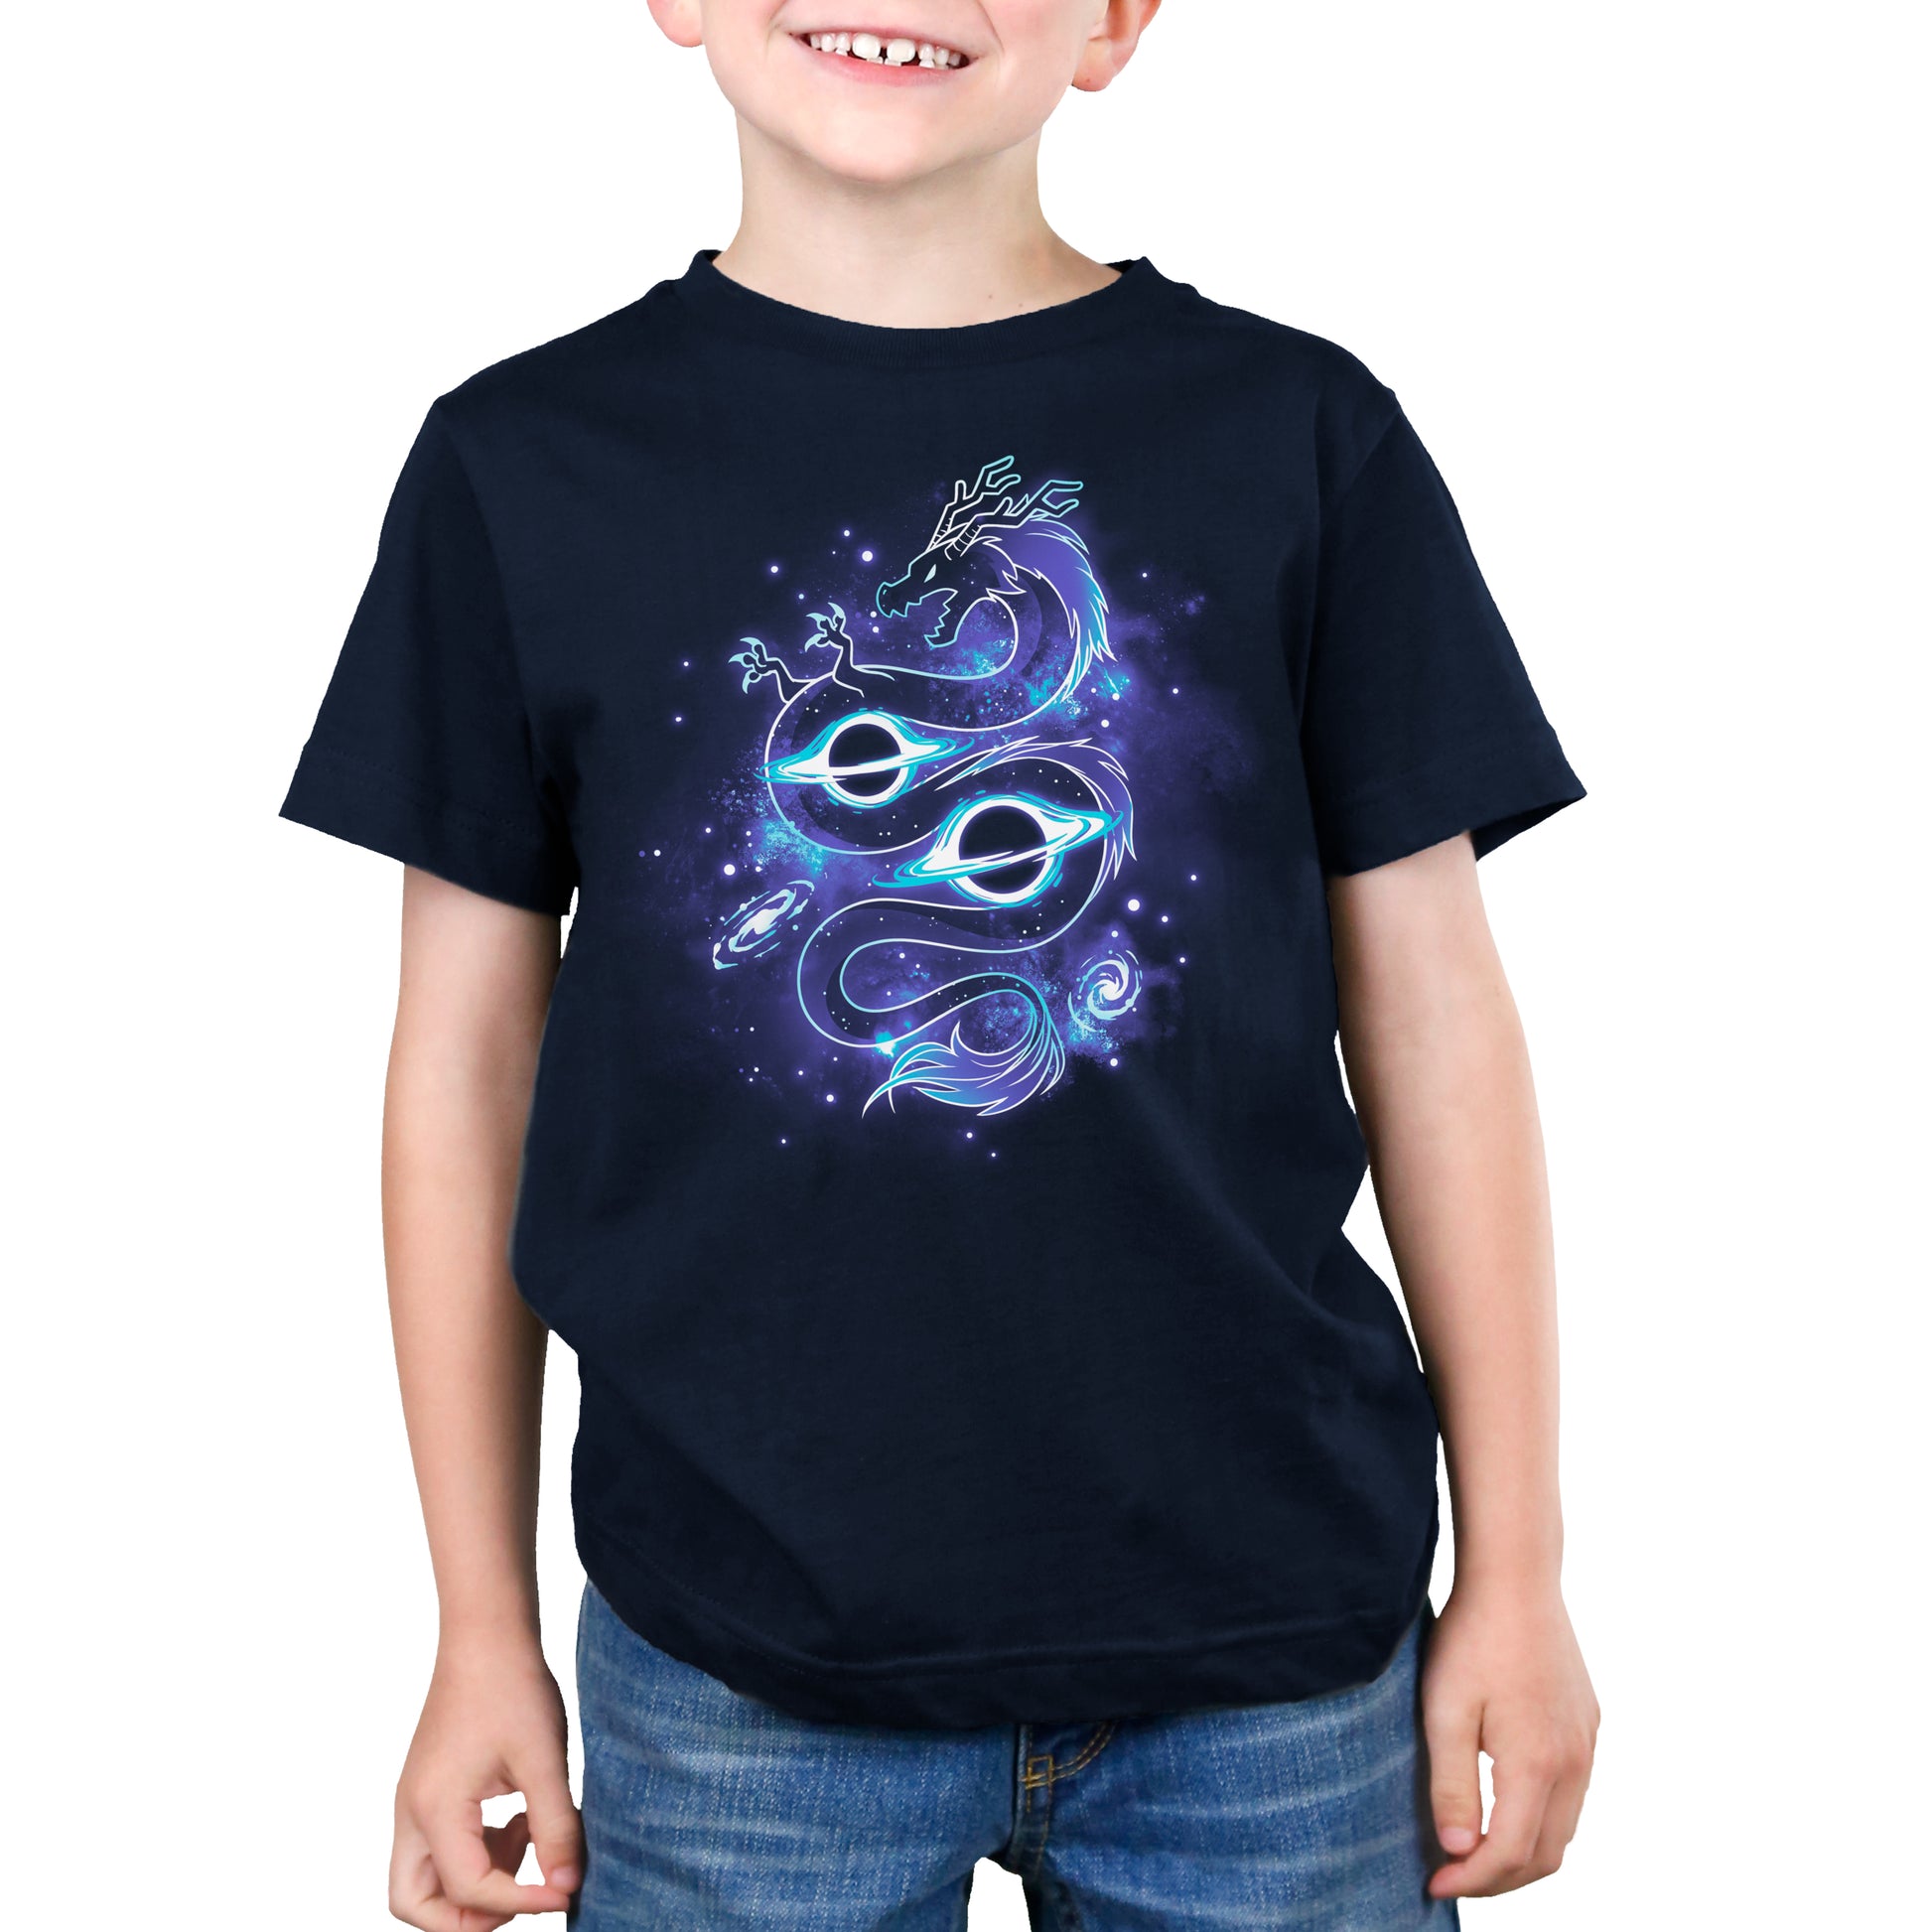 A young boy wearing a TeeTurtle Outer Space Dragon t-shirt.